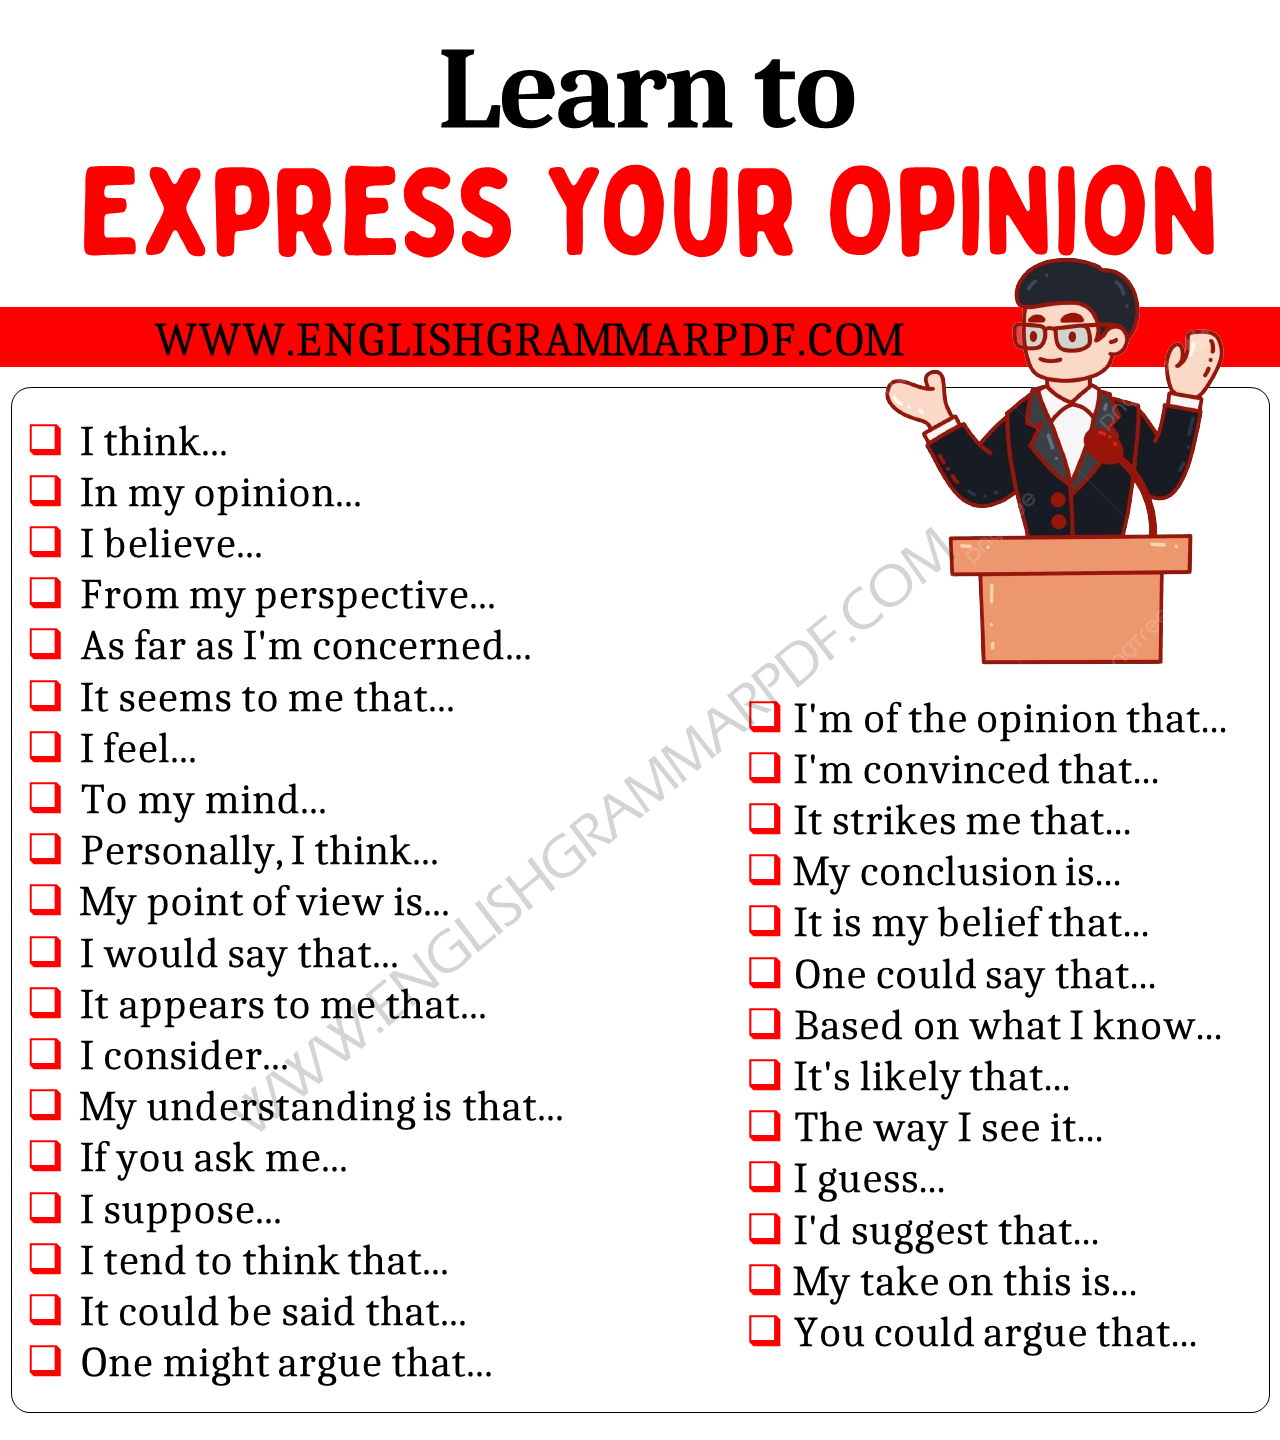 Learn to Express Your Opinion in English